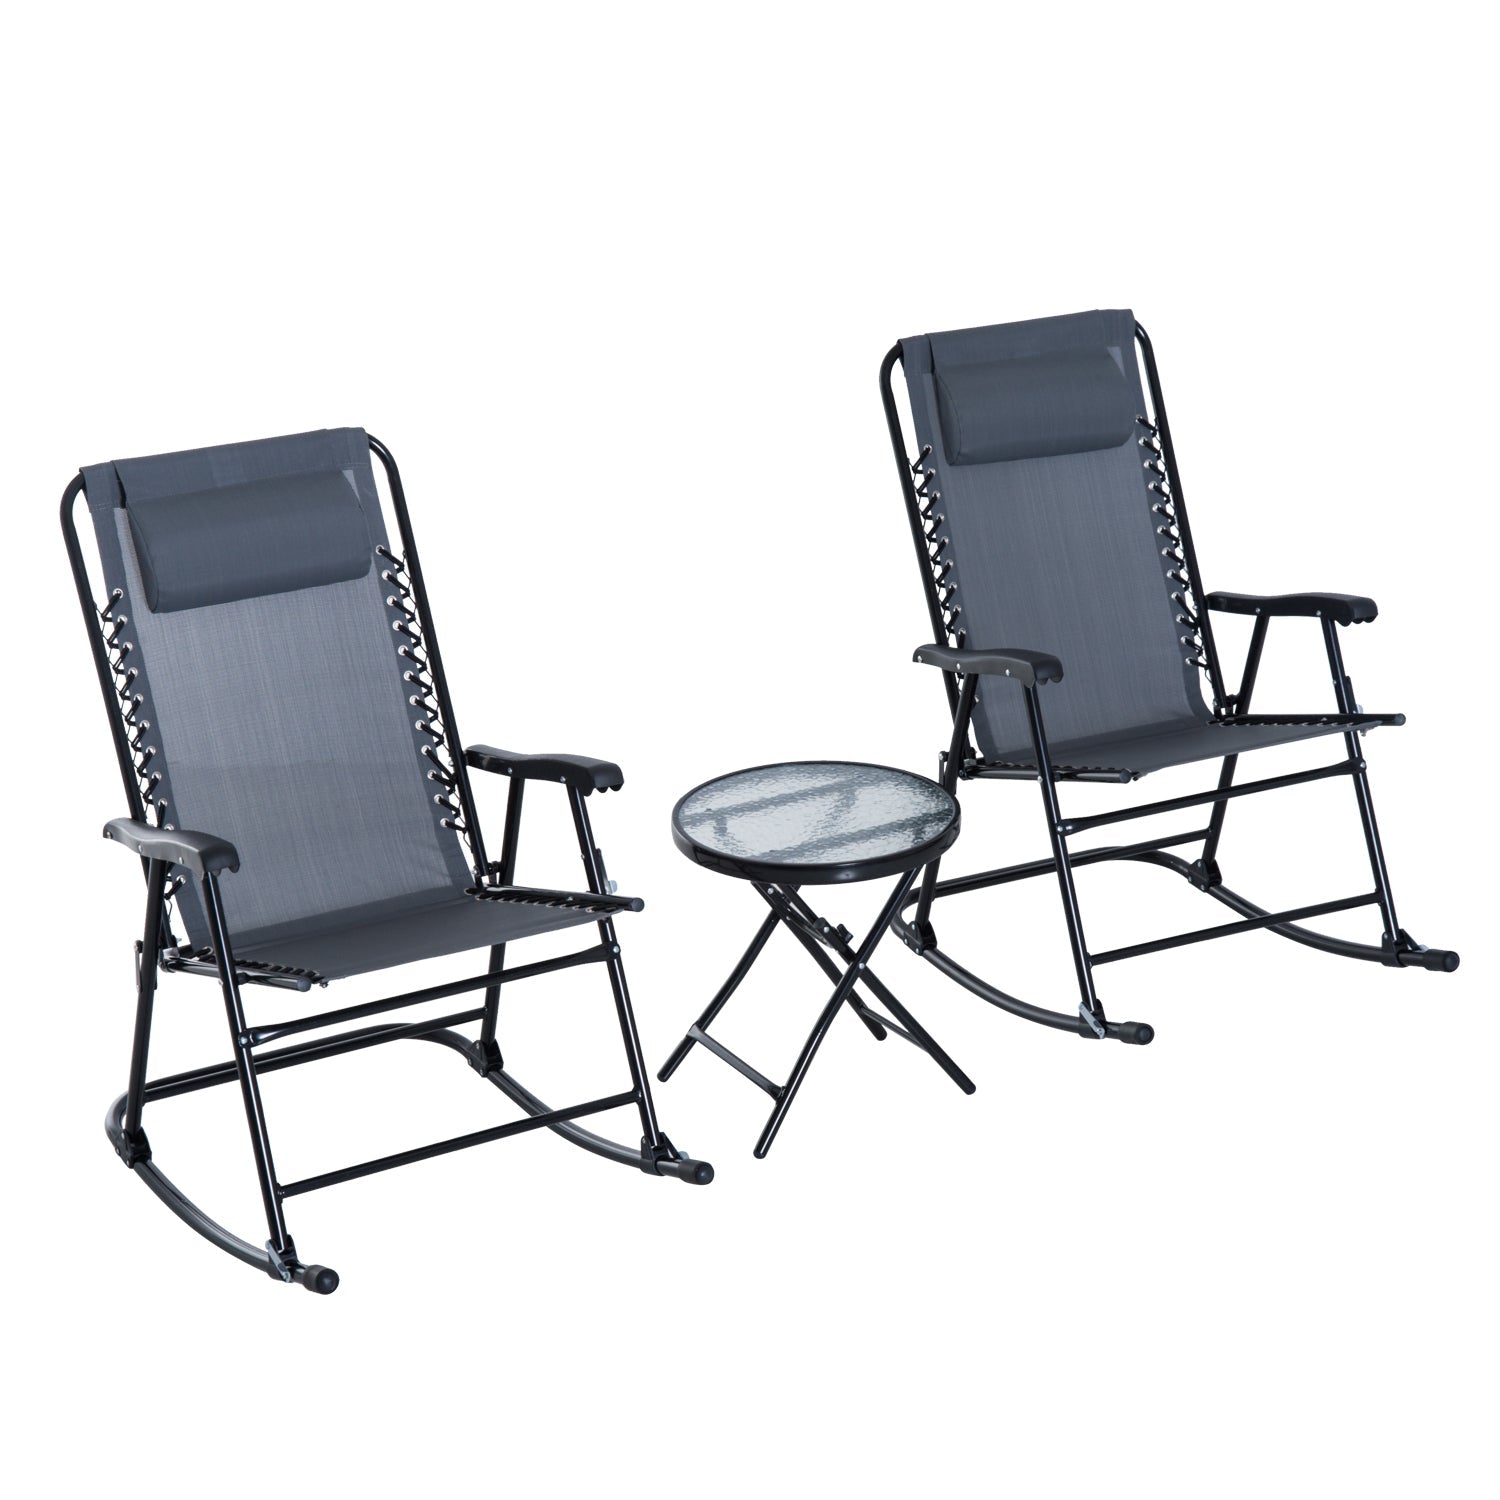 3 Piece Outdoor Rocking Set with 2 Folding Chairs and 1 Tempered Glass Table, Patio Bistro Set for Garden, Deck, Grey-0